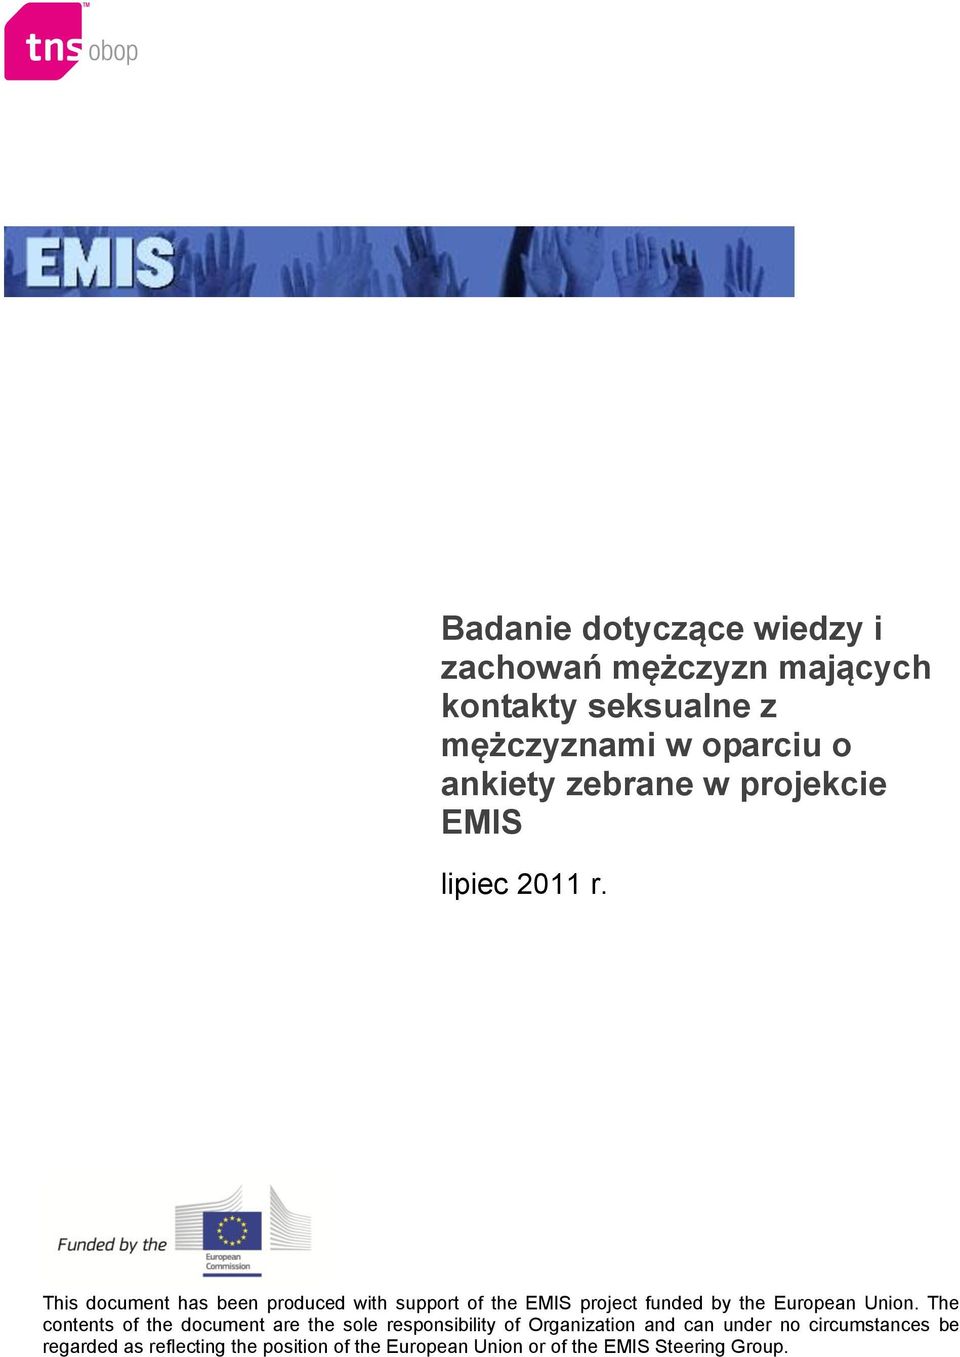 This document has been produced with support of the EMIS project funded by the European Union.